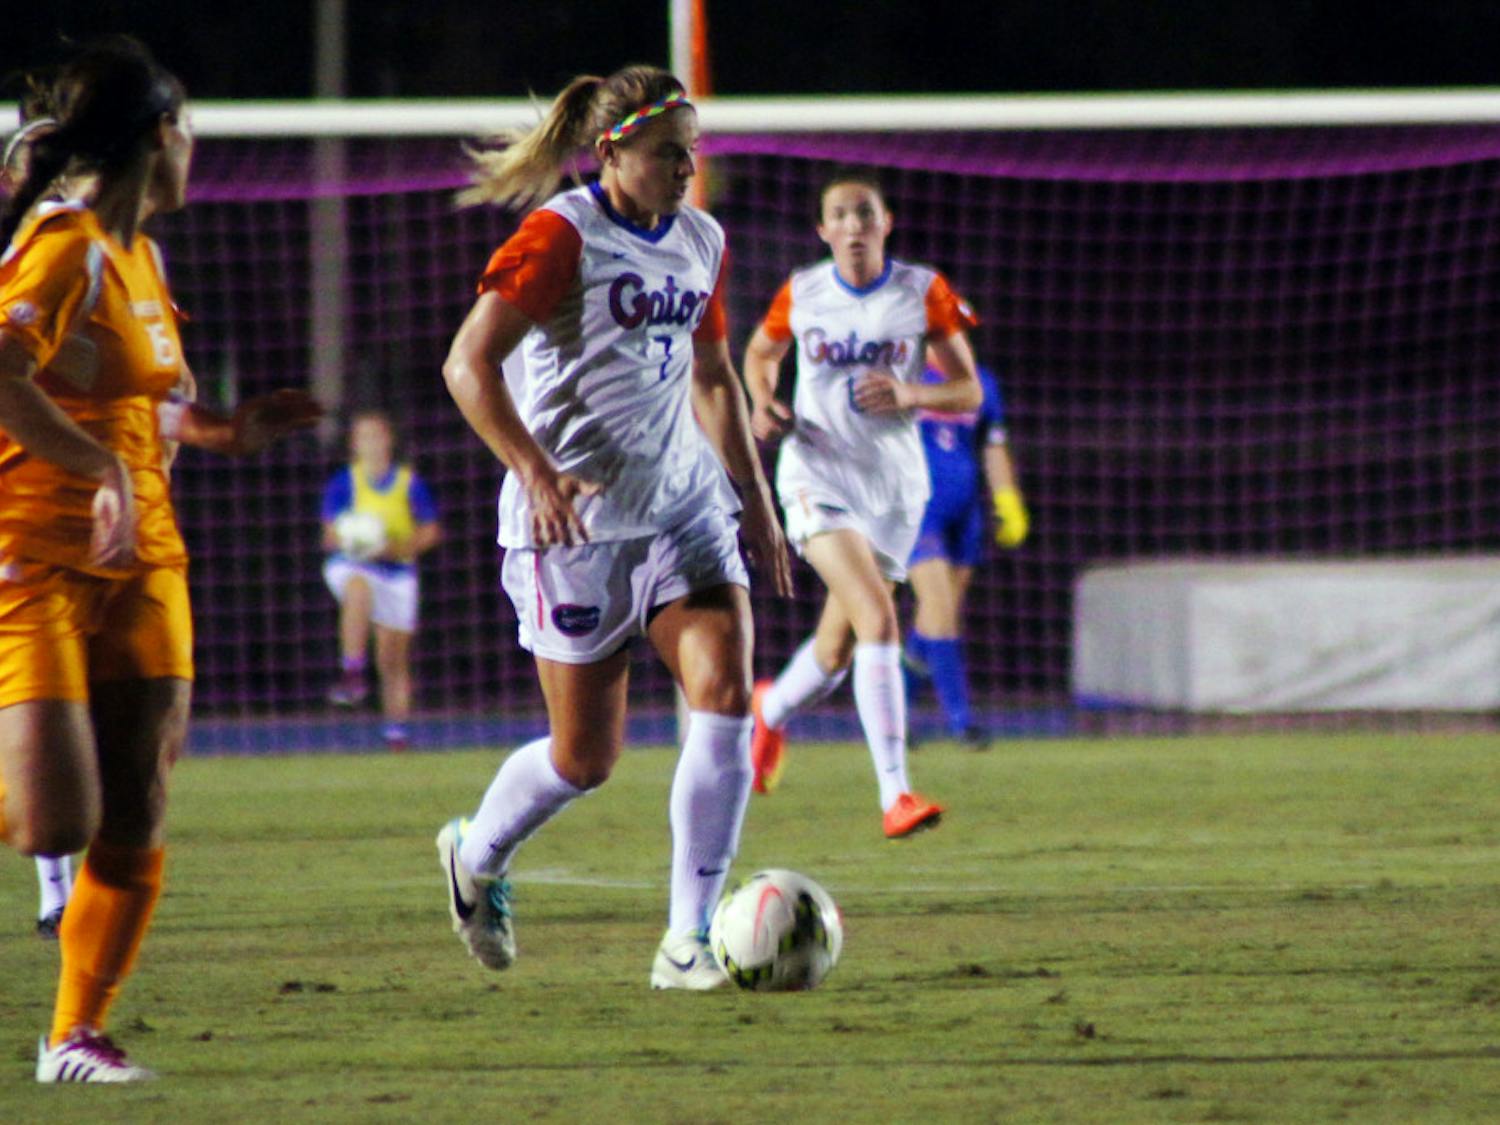 Savannah Jordan dribbles the ball during Florida's 3-1 win against Tennessee on Friday at James G. Pressly Stadium.